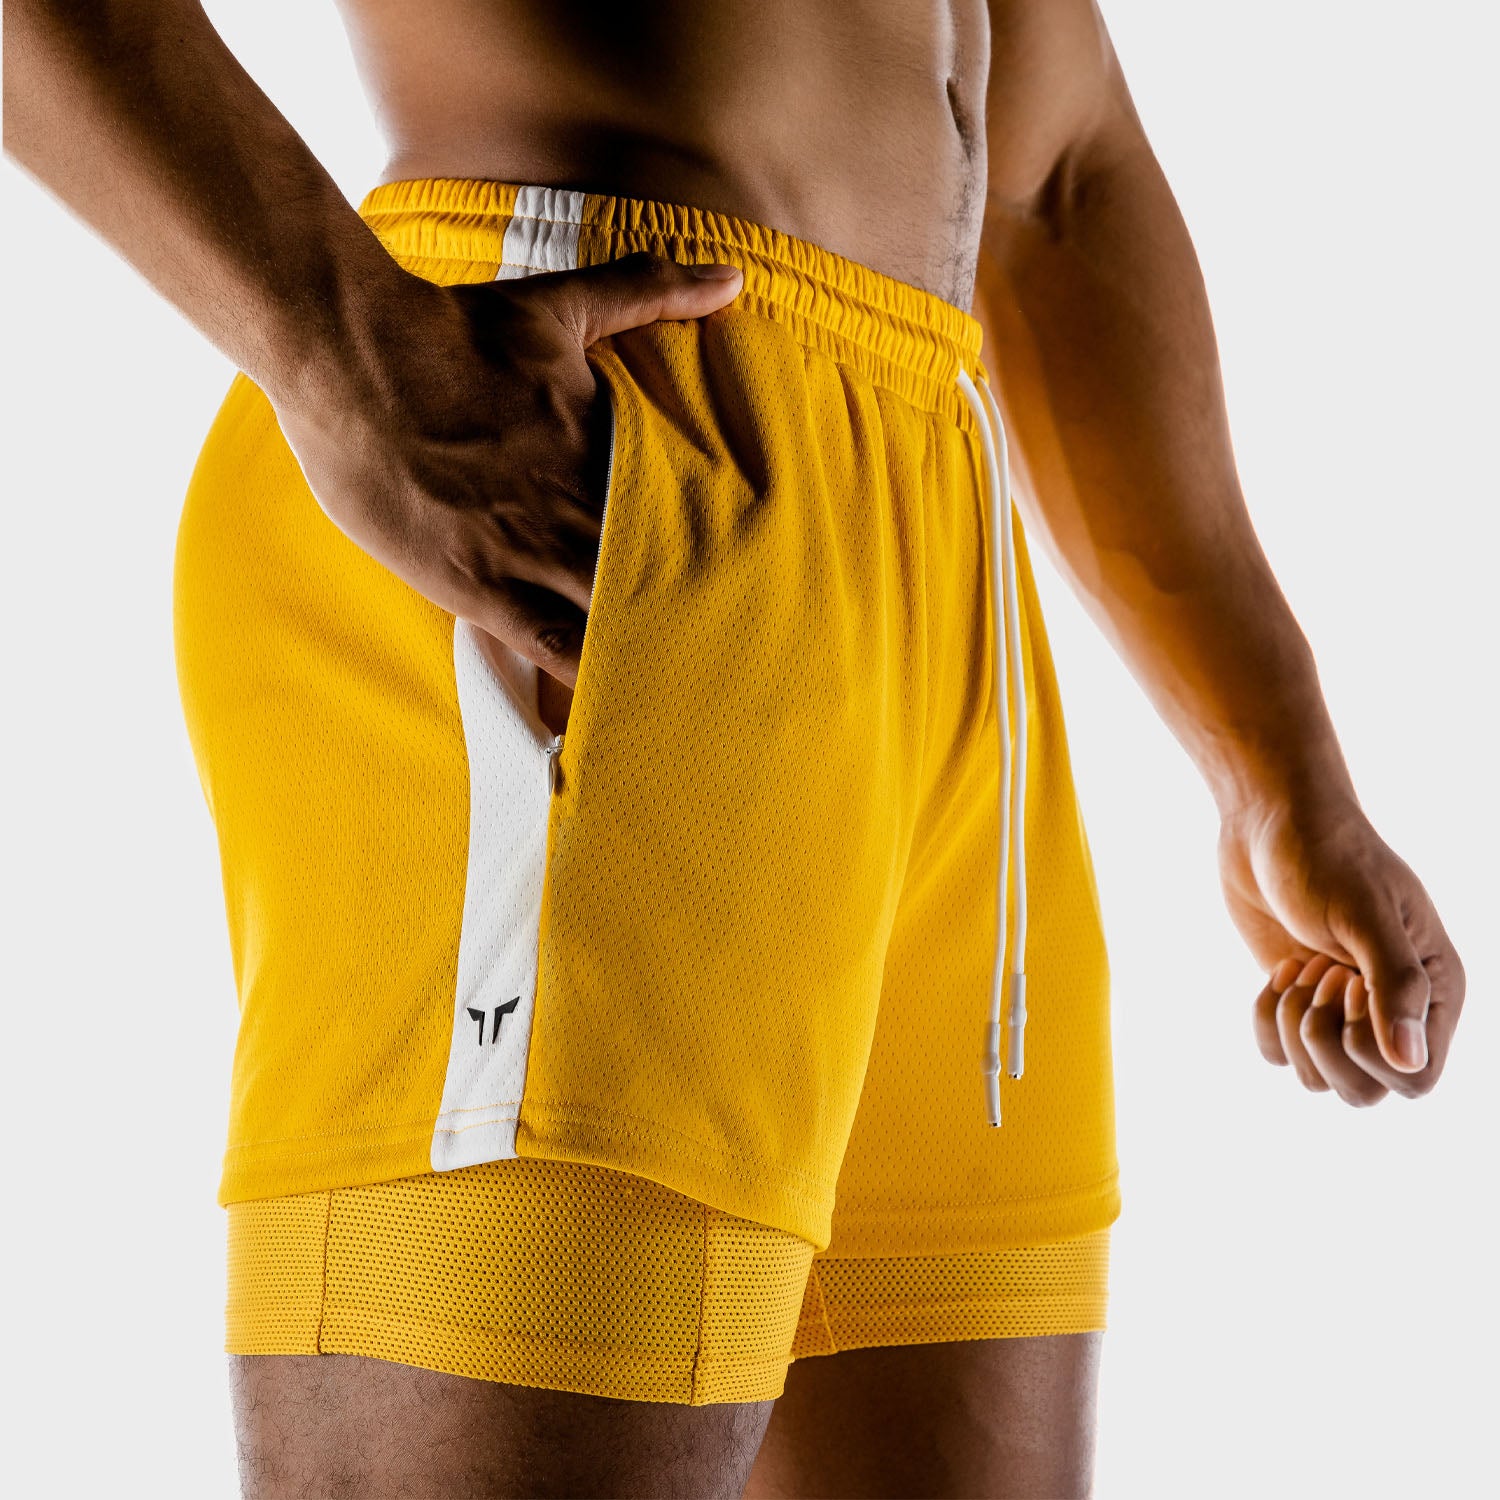 squatwolf-gym-wear-hybrid-performance-2-in-1-shorts-yellow-workout-shorts-for-men